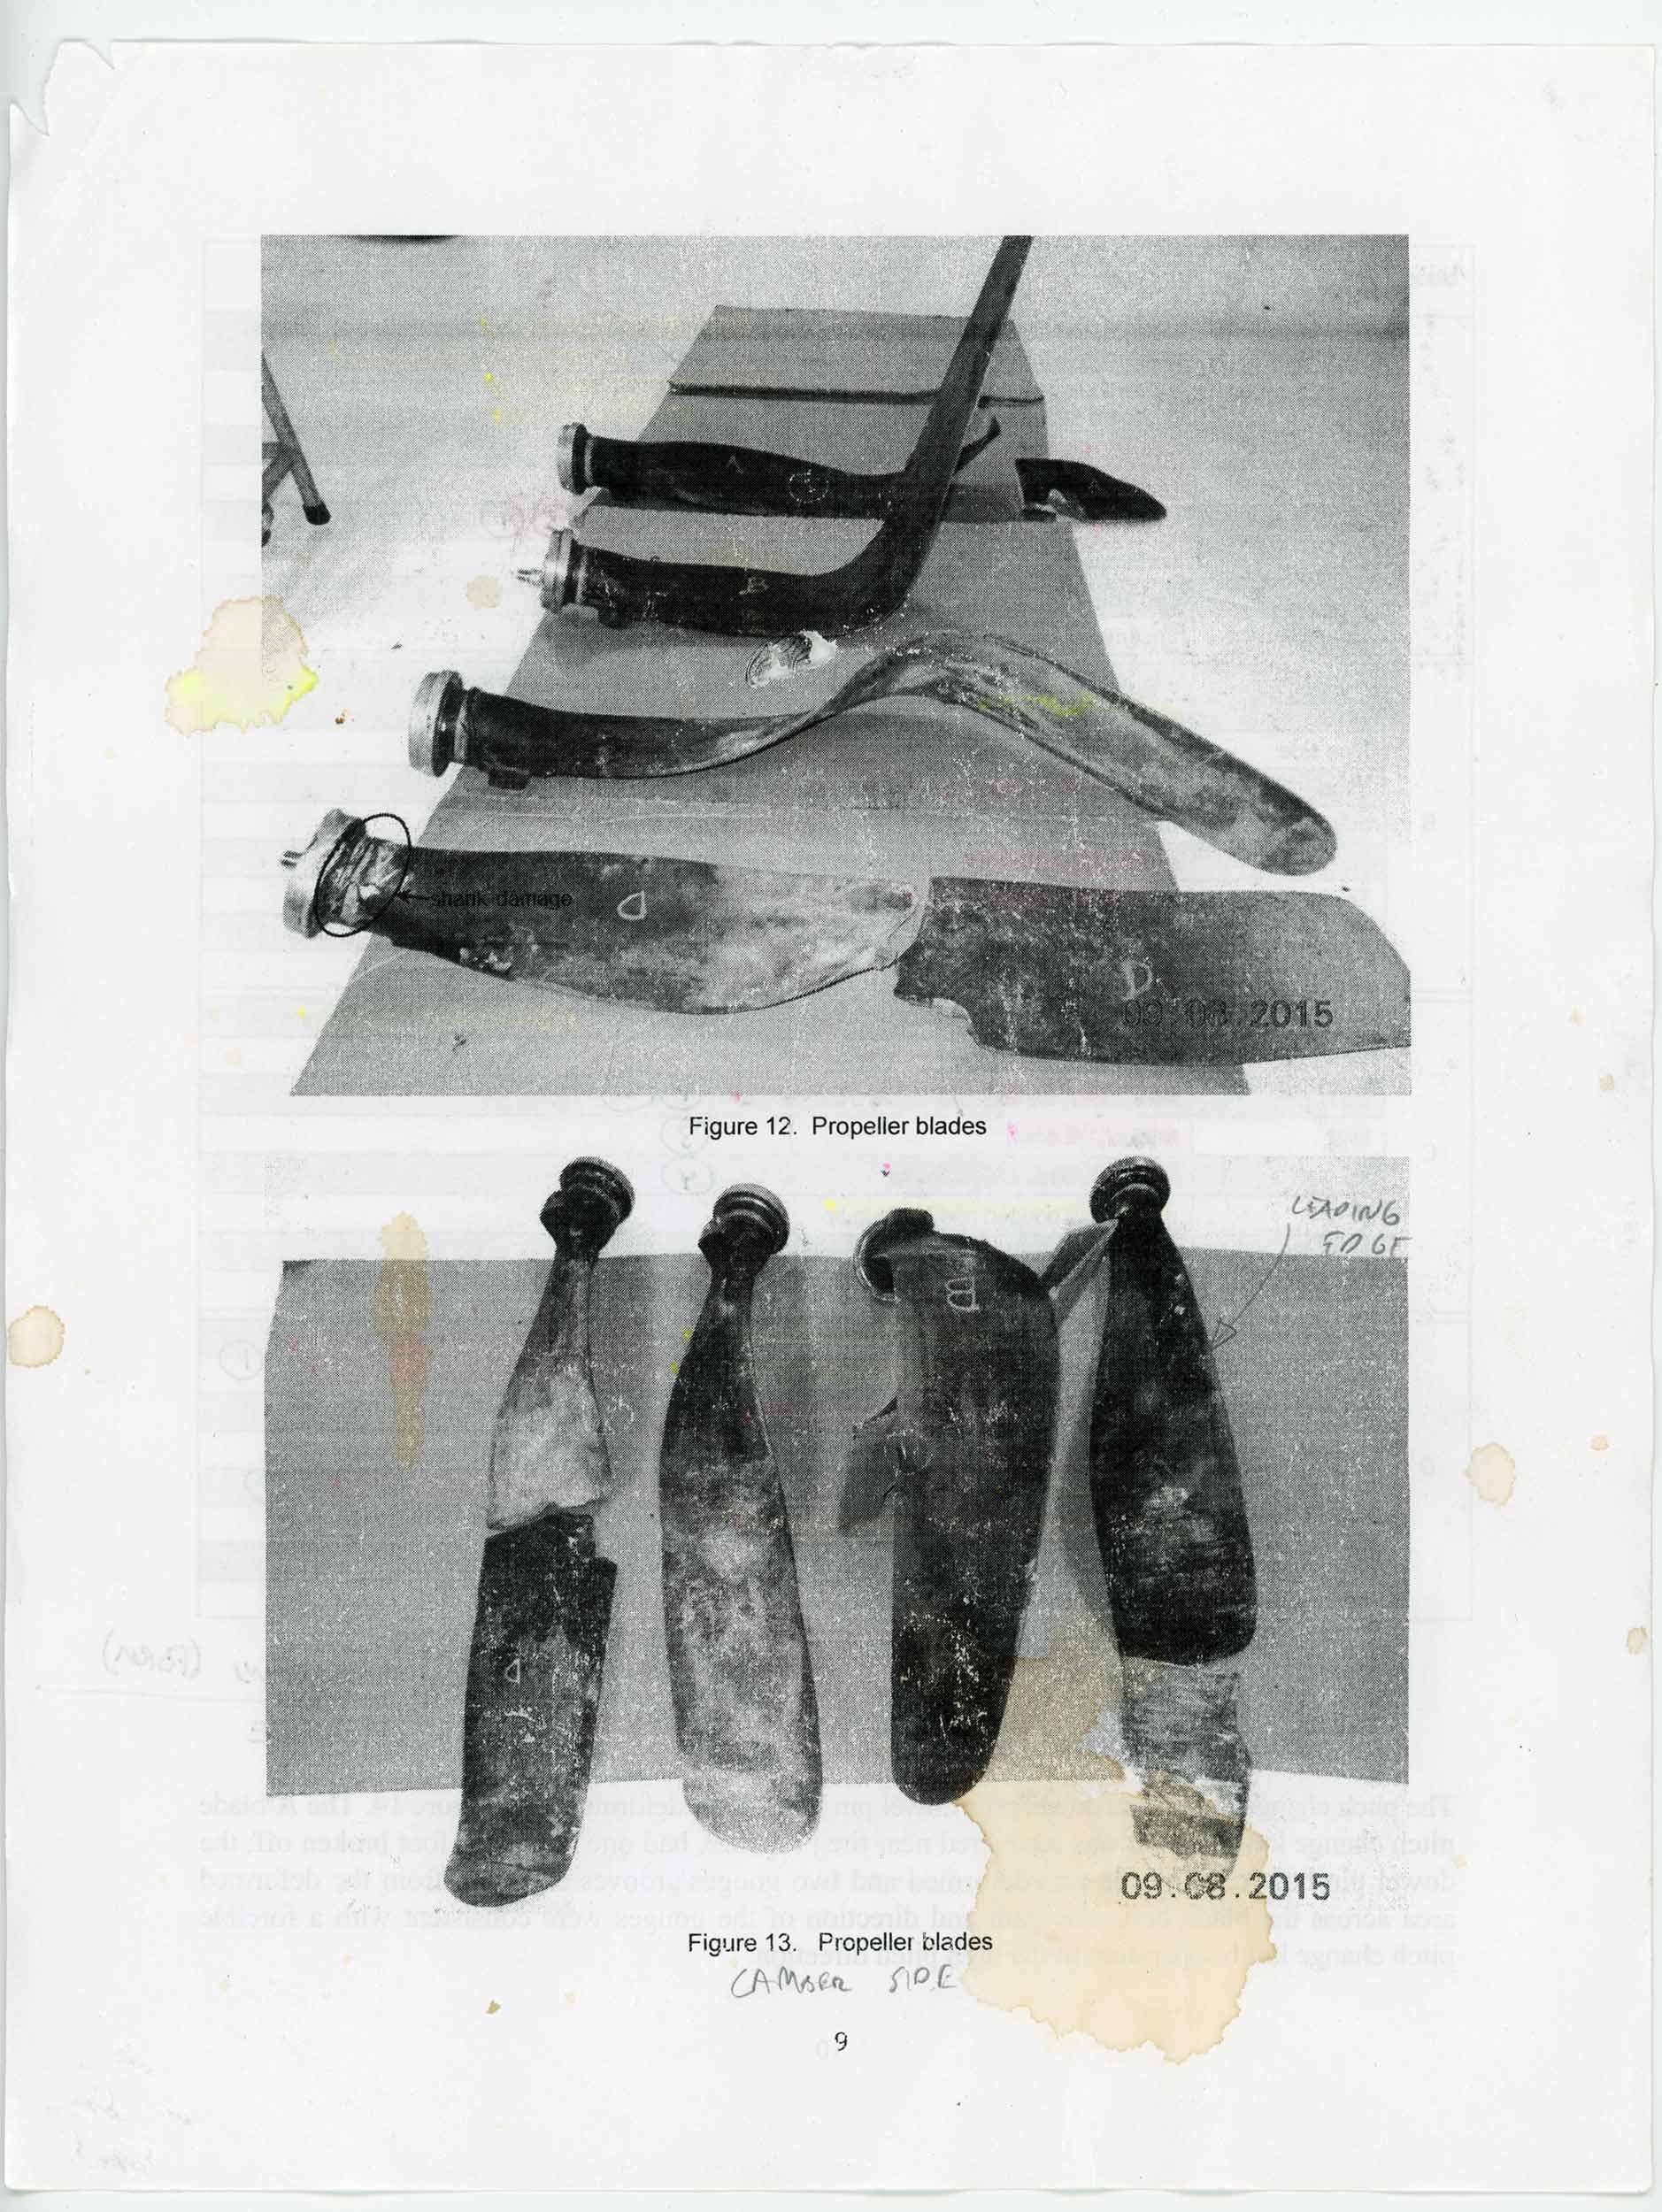   NTSB Forensic Images of Blades  